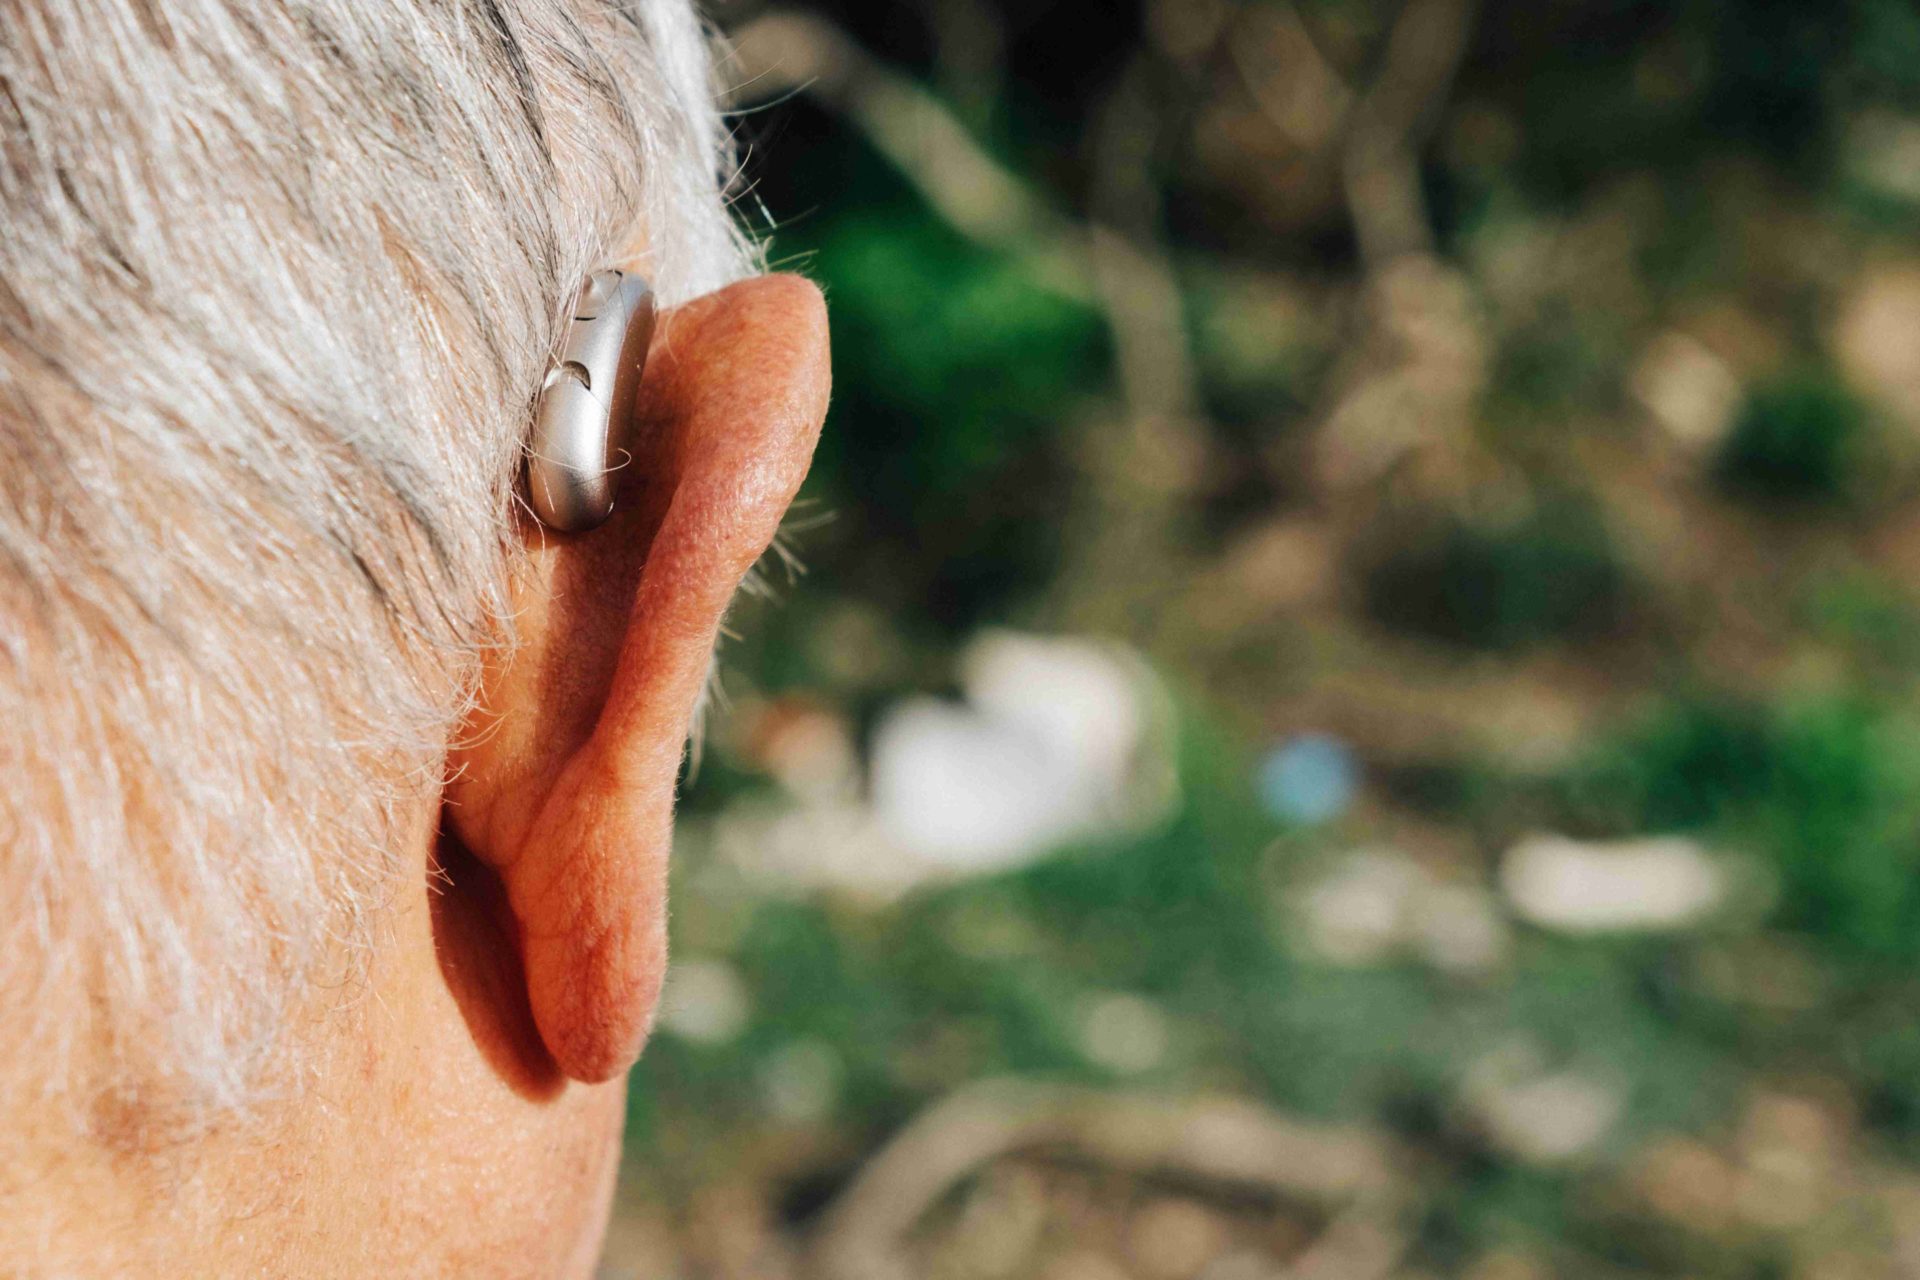 behind the ear hearing aid being worn by a man